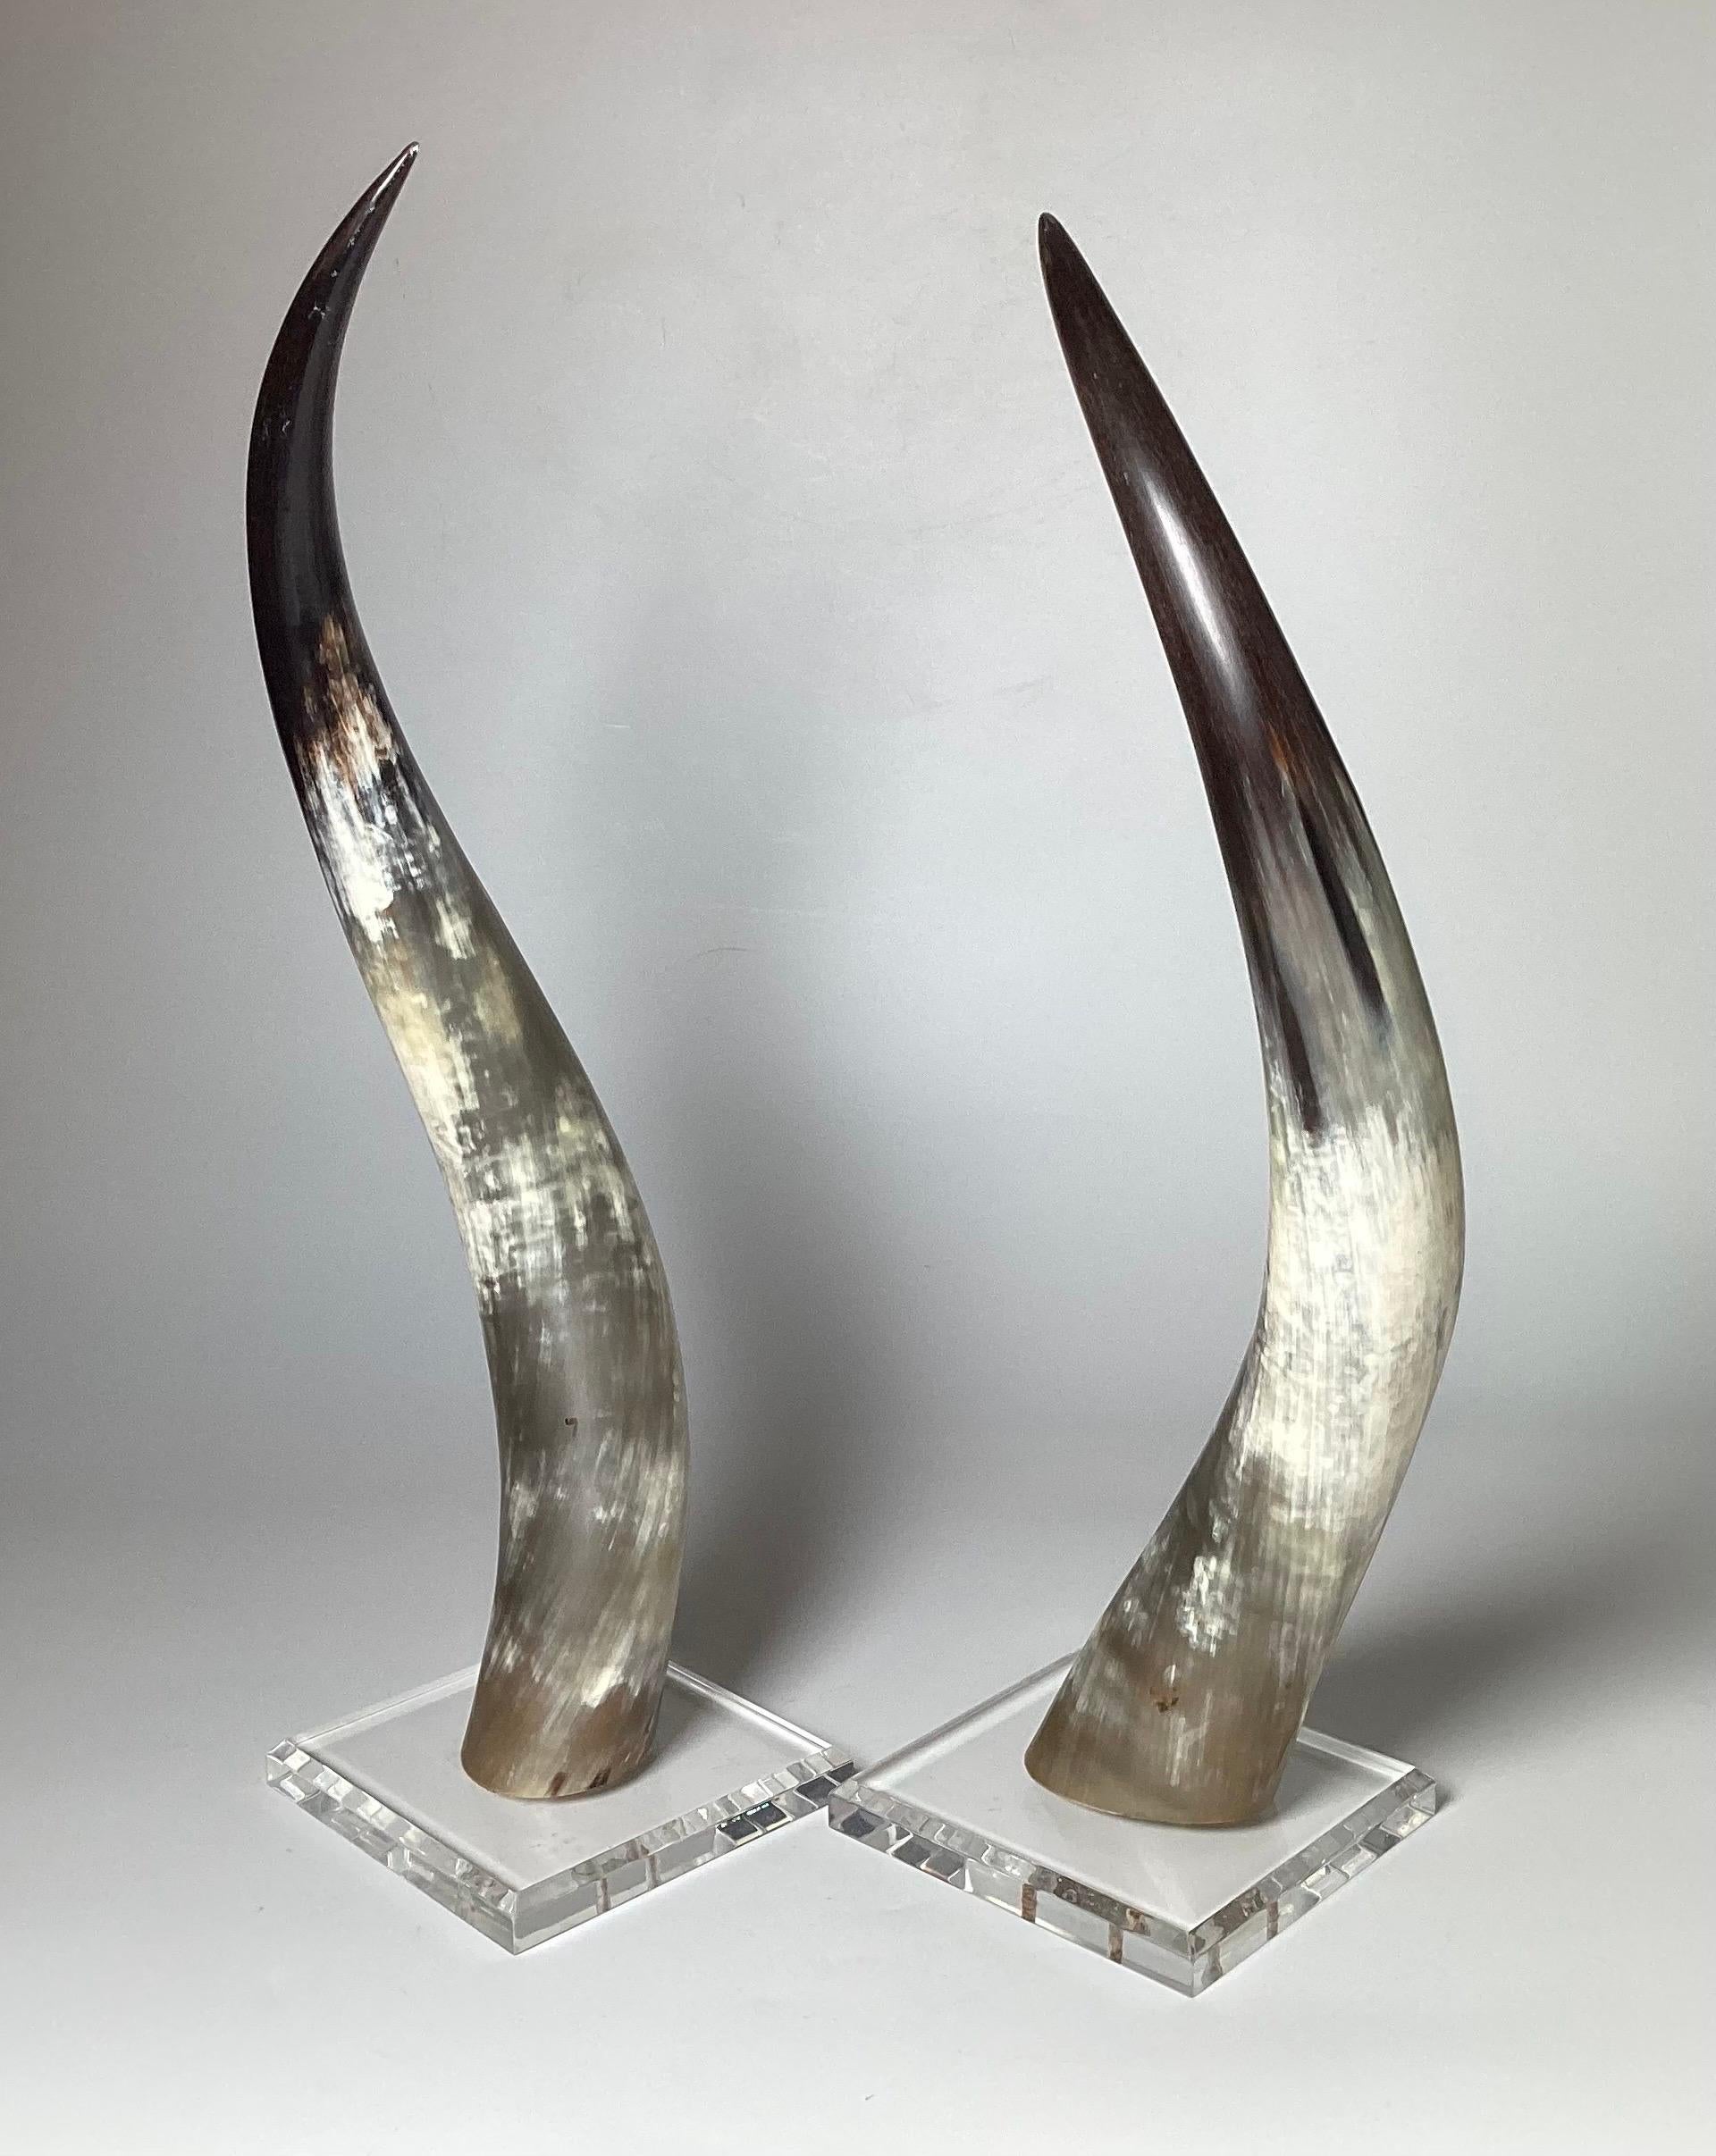 A chic pair of steer horns each mounted on Lucite bases. These highly decorative horns add a unique air of sophistication to the décor of any space 6 inches square base, 20.5 inches tall.